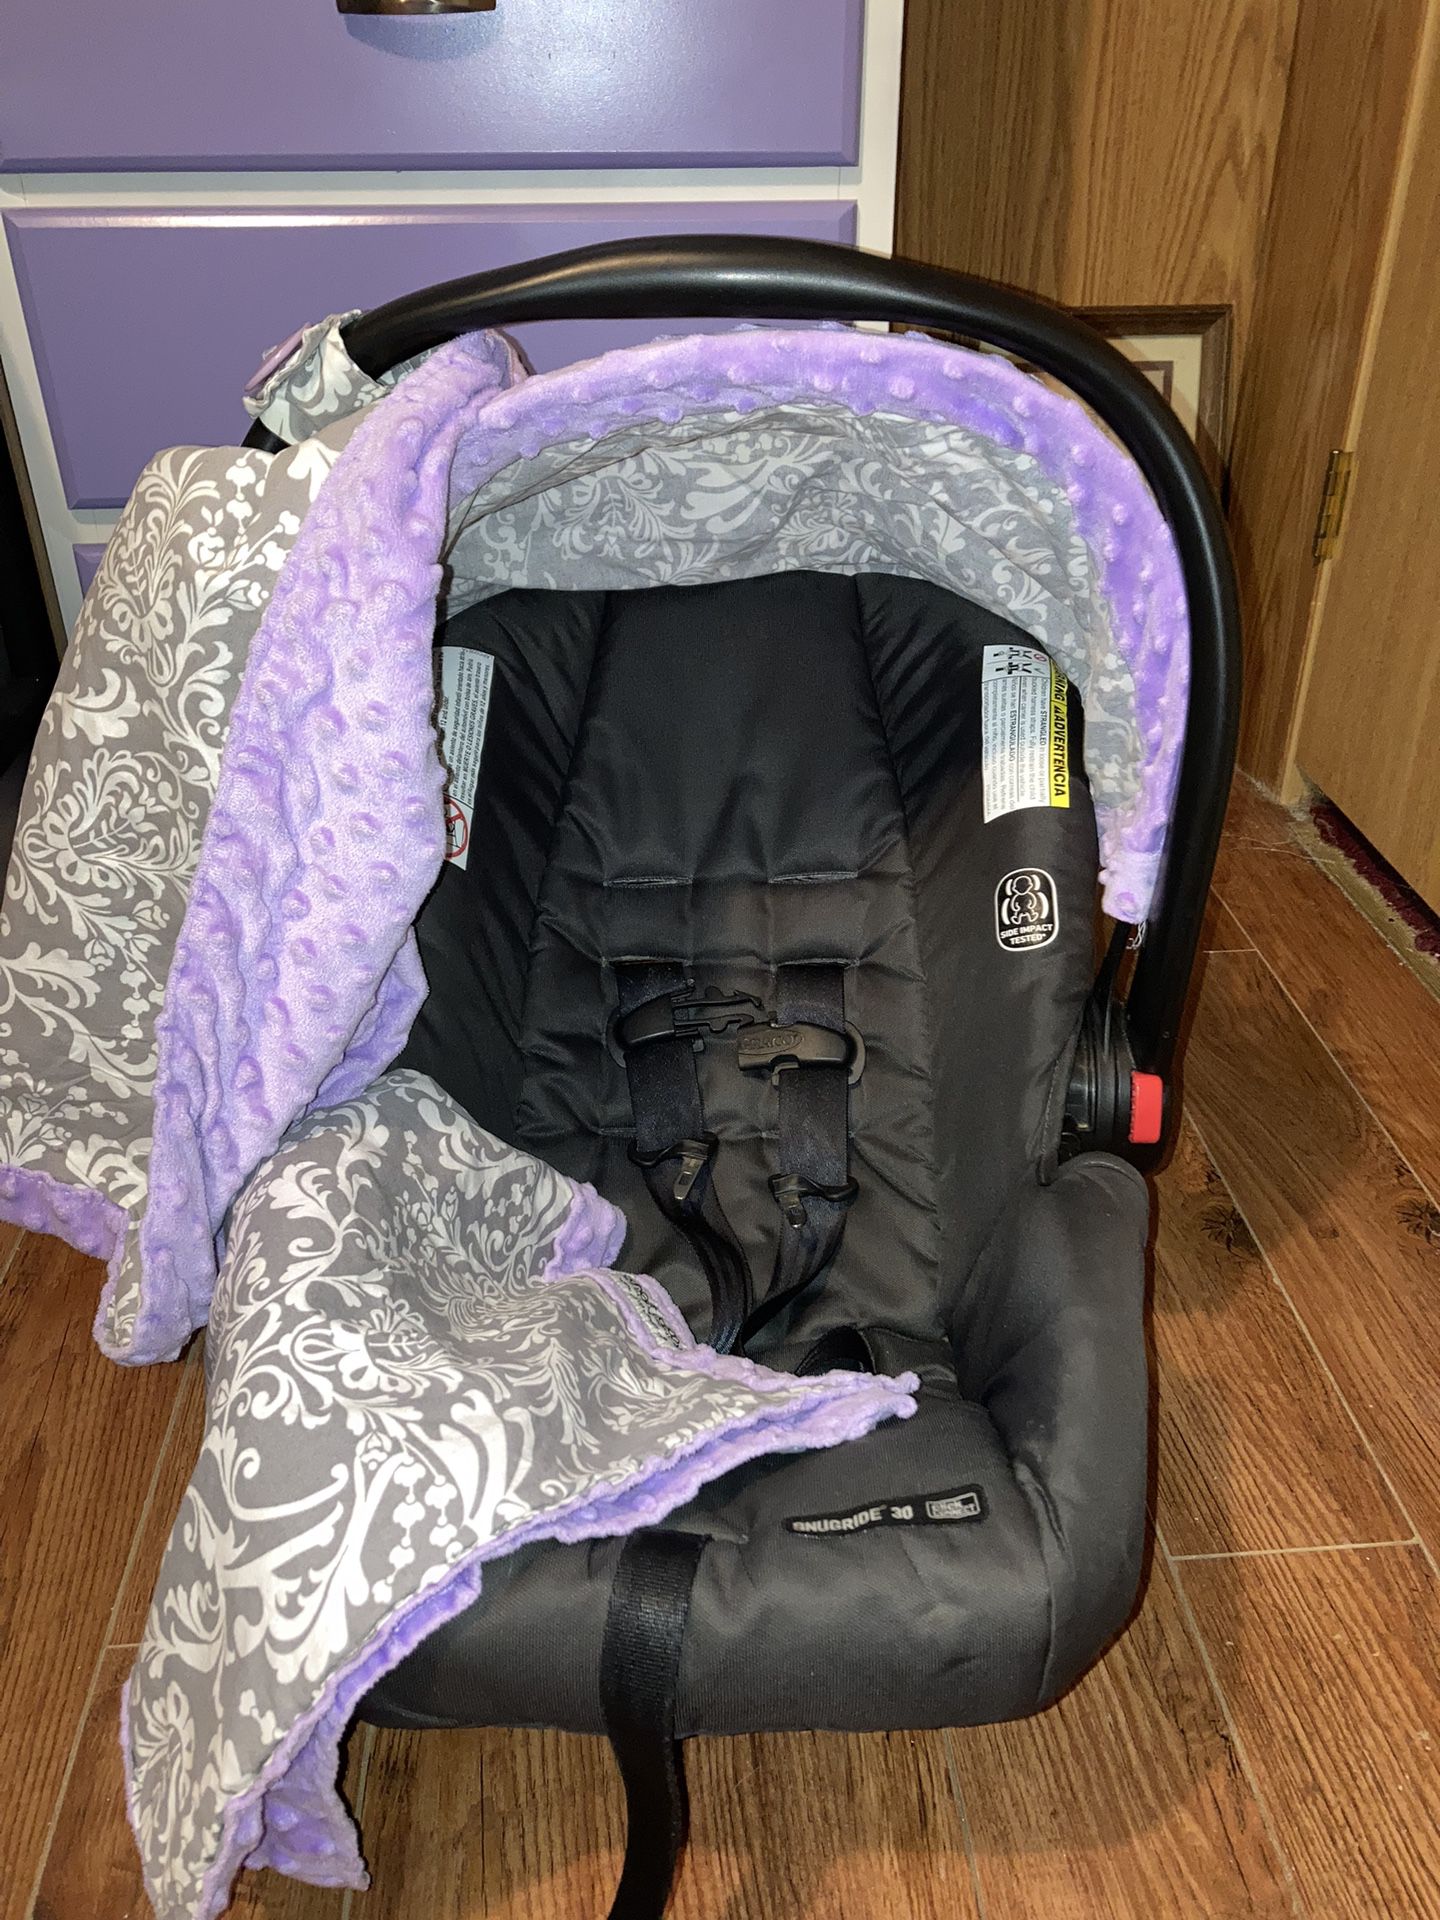 Graco Car Seat Snugride 30 With Car seat Canopy Set